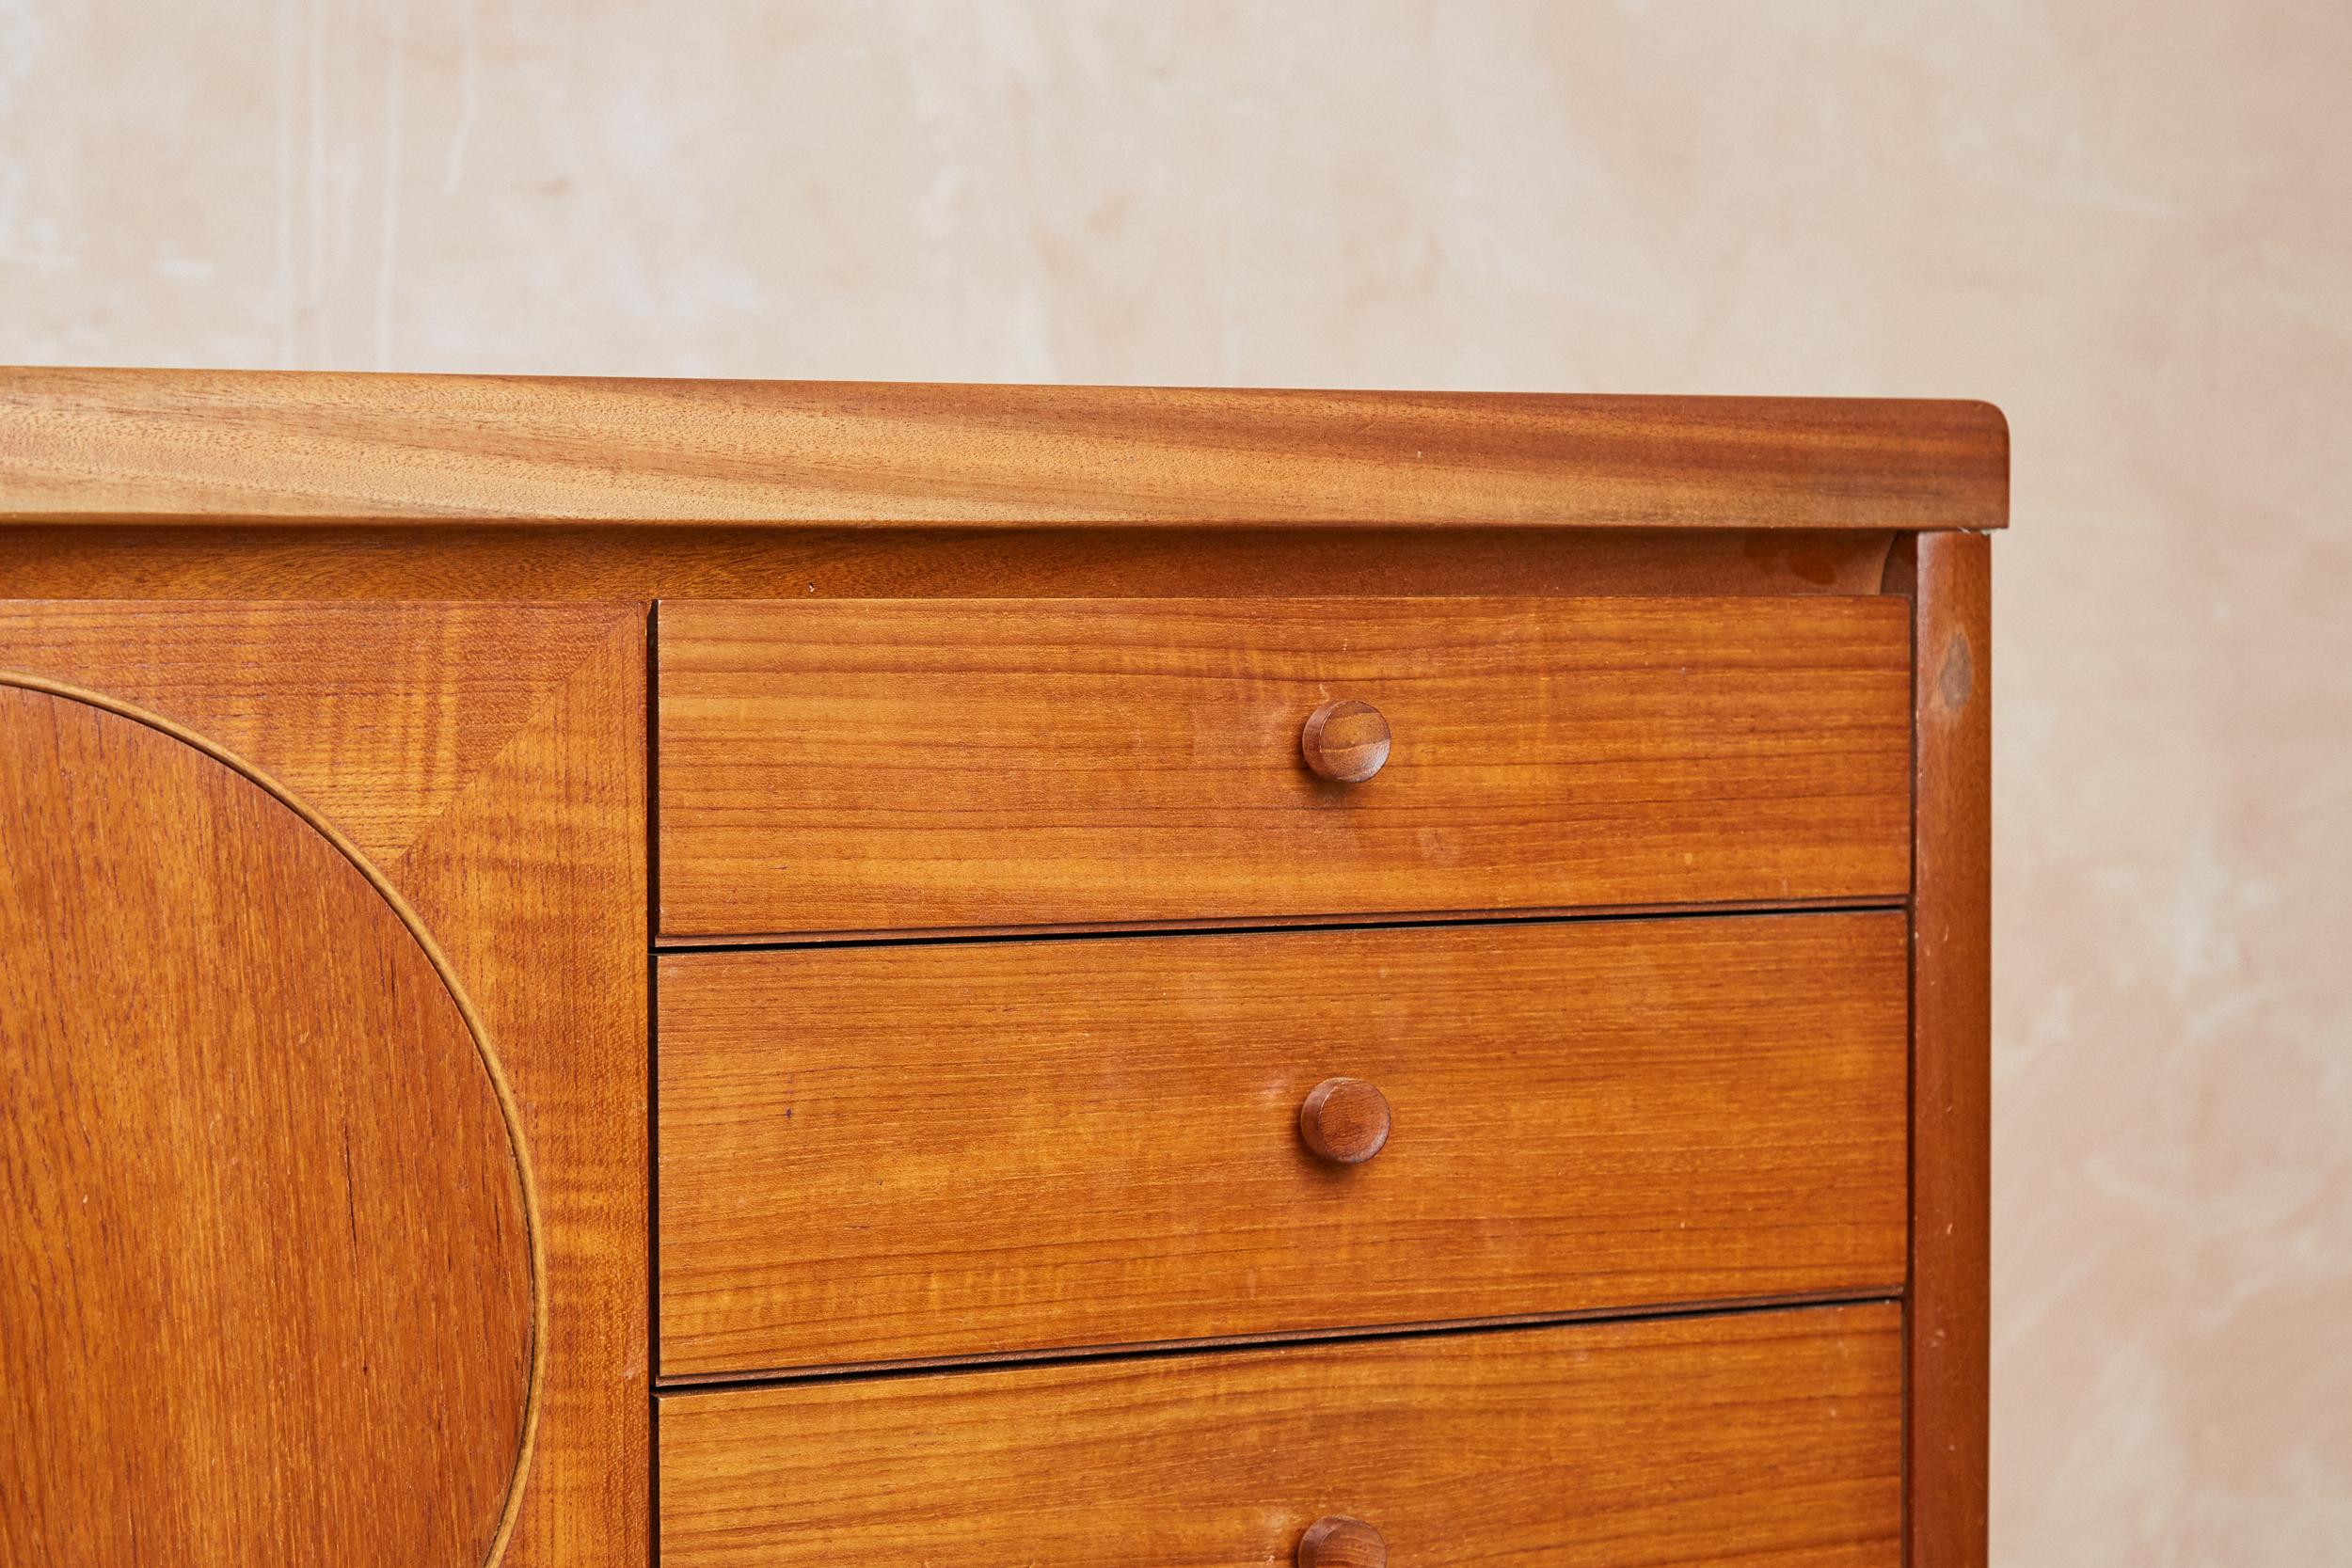 A classic mid century staple, the Nathan Circles 6ft sideboard is a popular vintage piece due to being well designed both aesthetically and practically. Taking it’s name from the iconic circles motif on the three cupboard doors, the sideboard